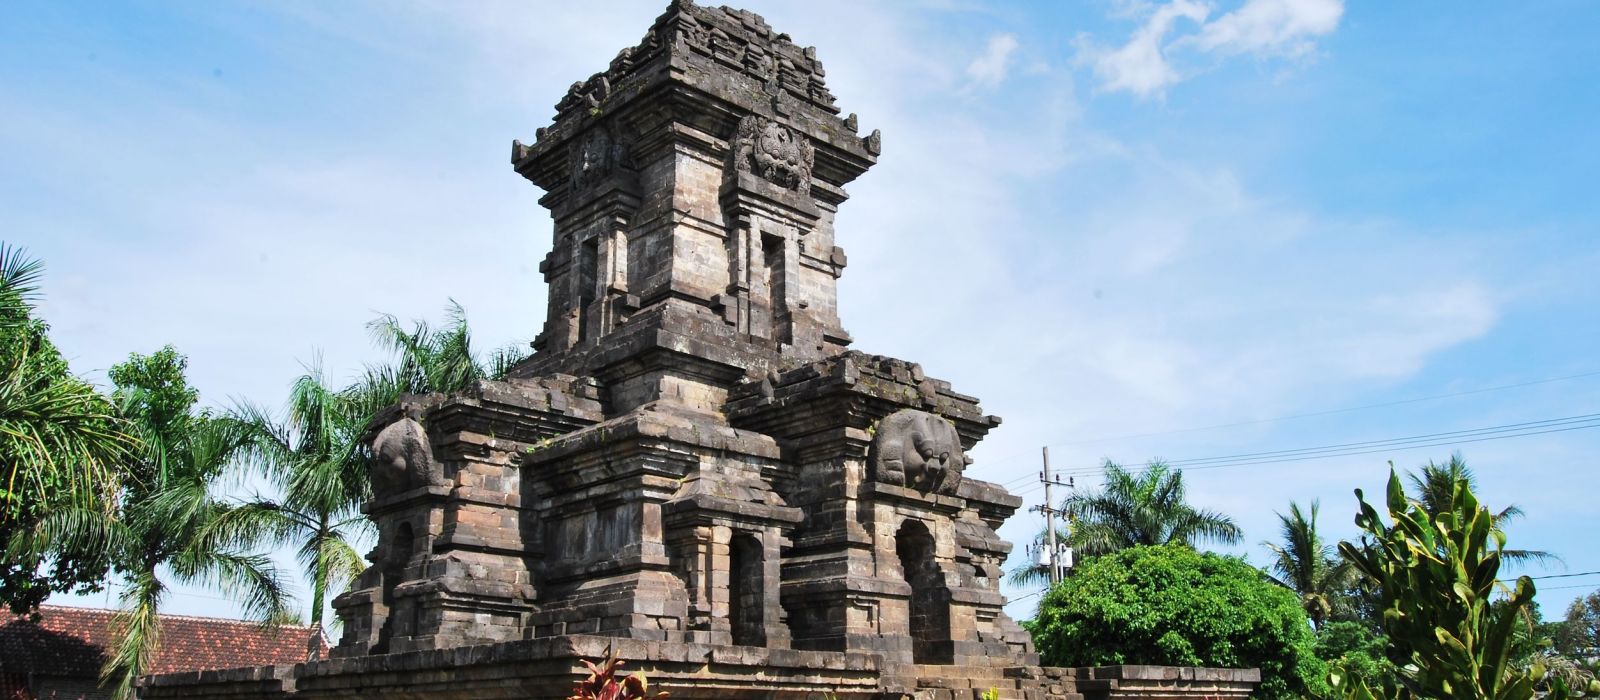 Exclusive Travel Tips for Your Destination Malang in Indonesia